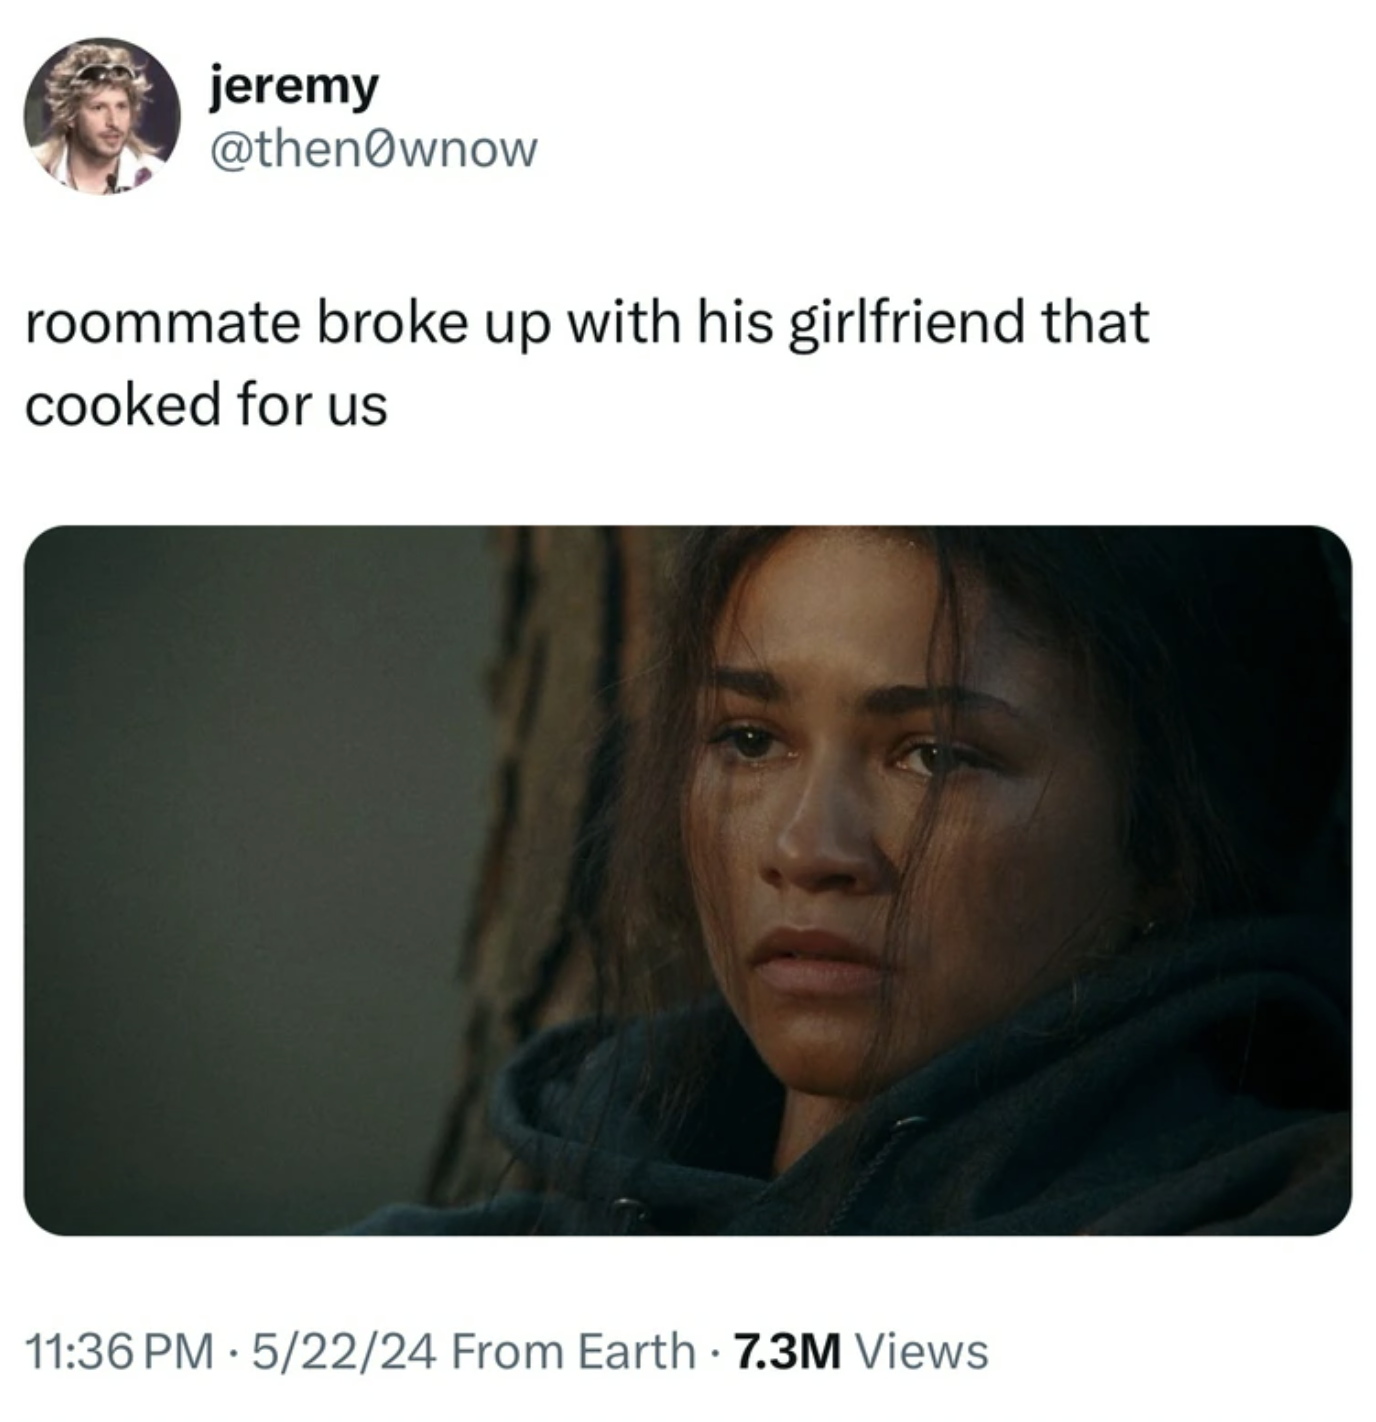 screenshot - jeremy roommate broke up with his girlfriend that cooked for us 52224 From Earth 7.3M Views